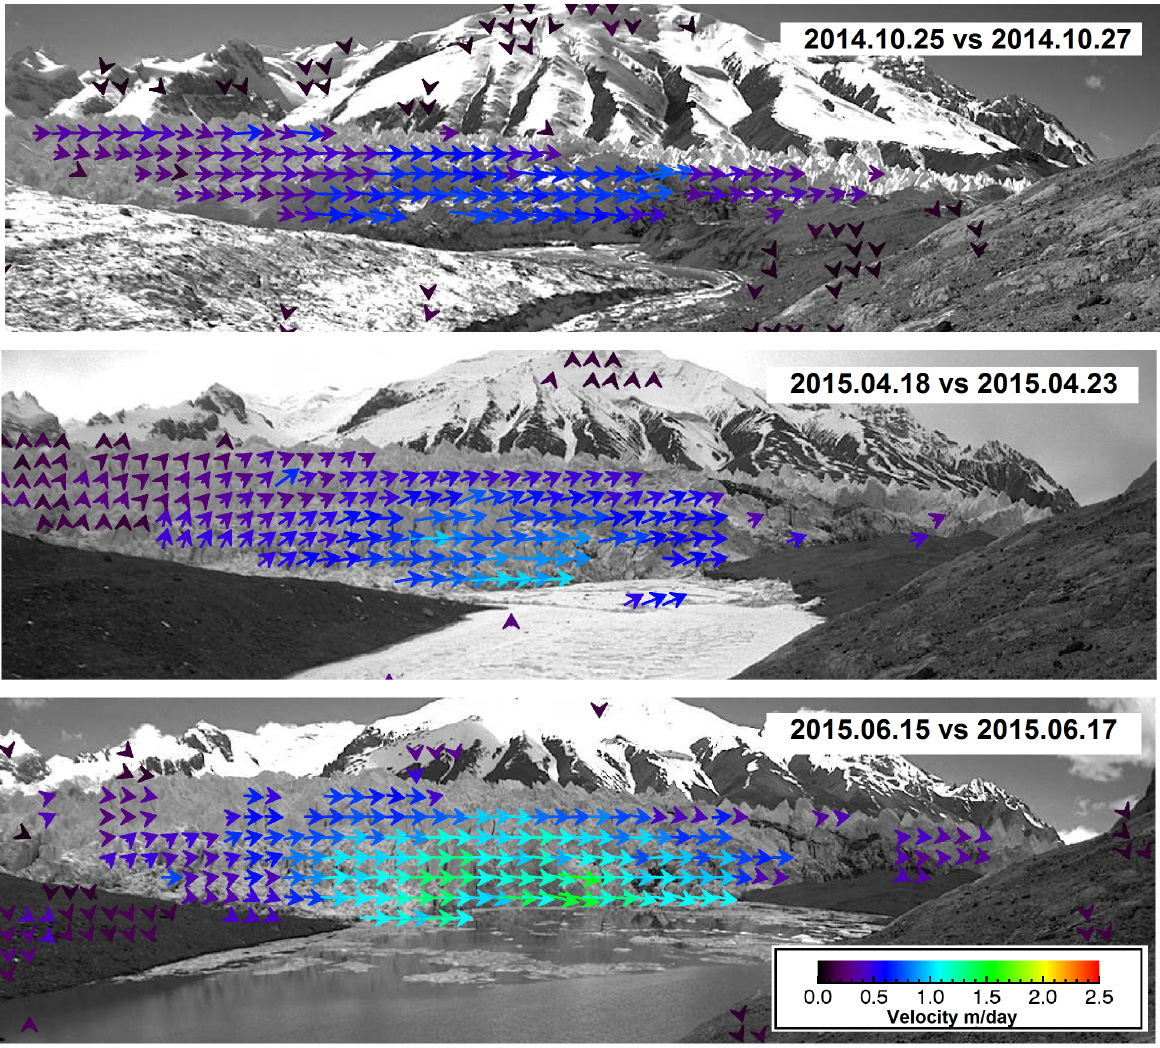 Enlarged view: Velocity fields of the ice at the glacier terminus